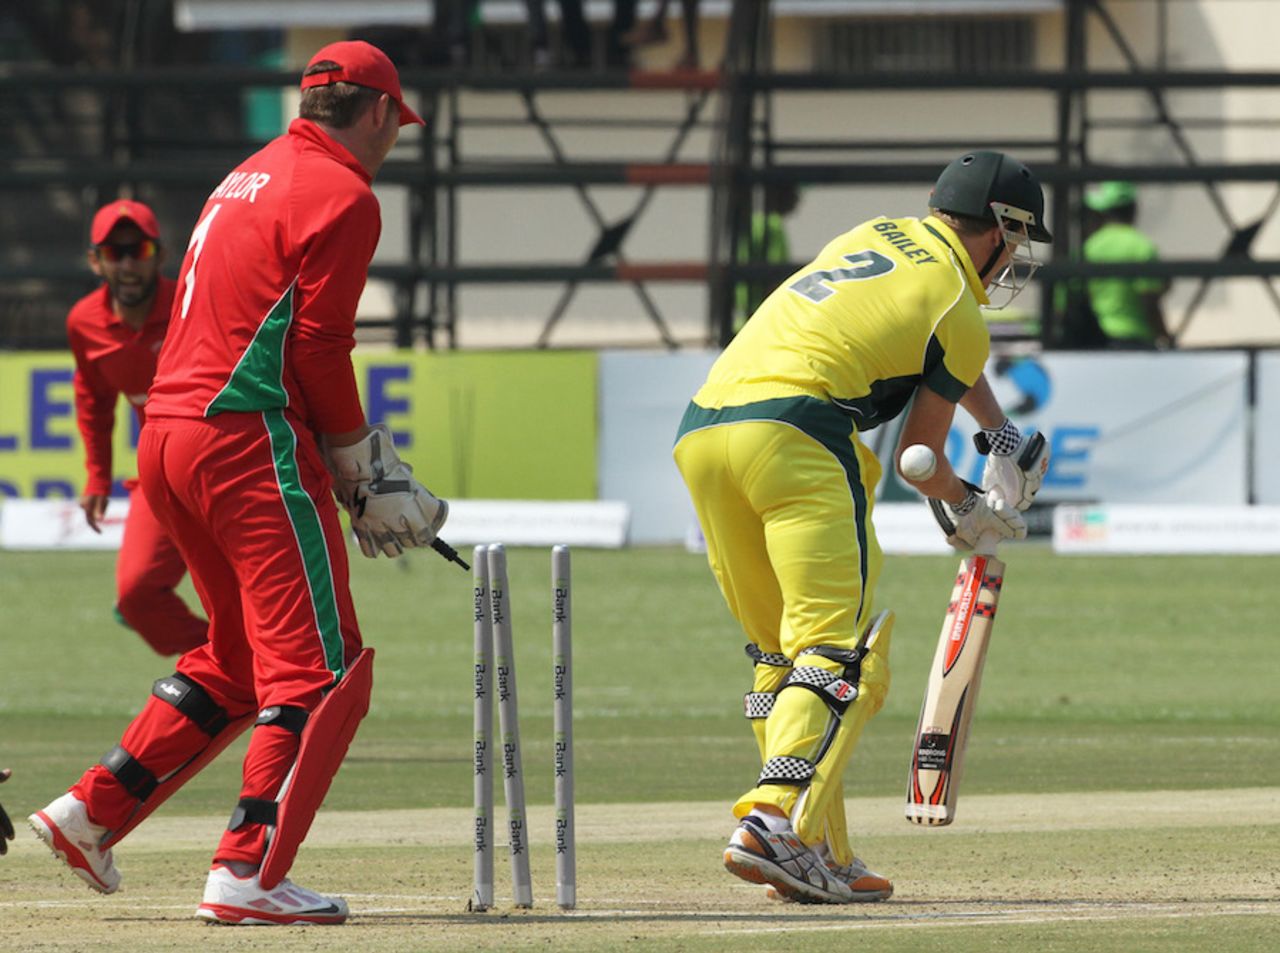 George Bailey was bowled by Sean Williams, Zimbabwe v Australia, tri-series, Harare, August 31, 2014